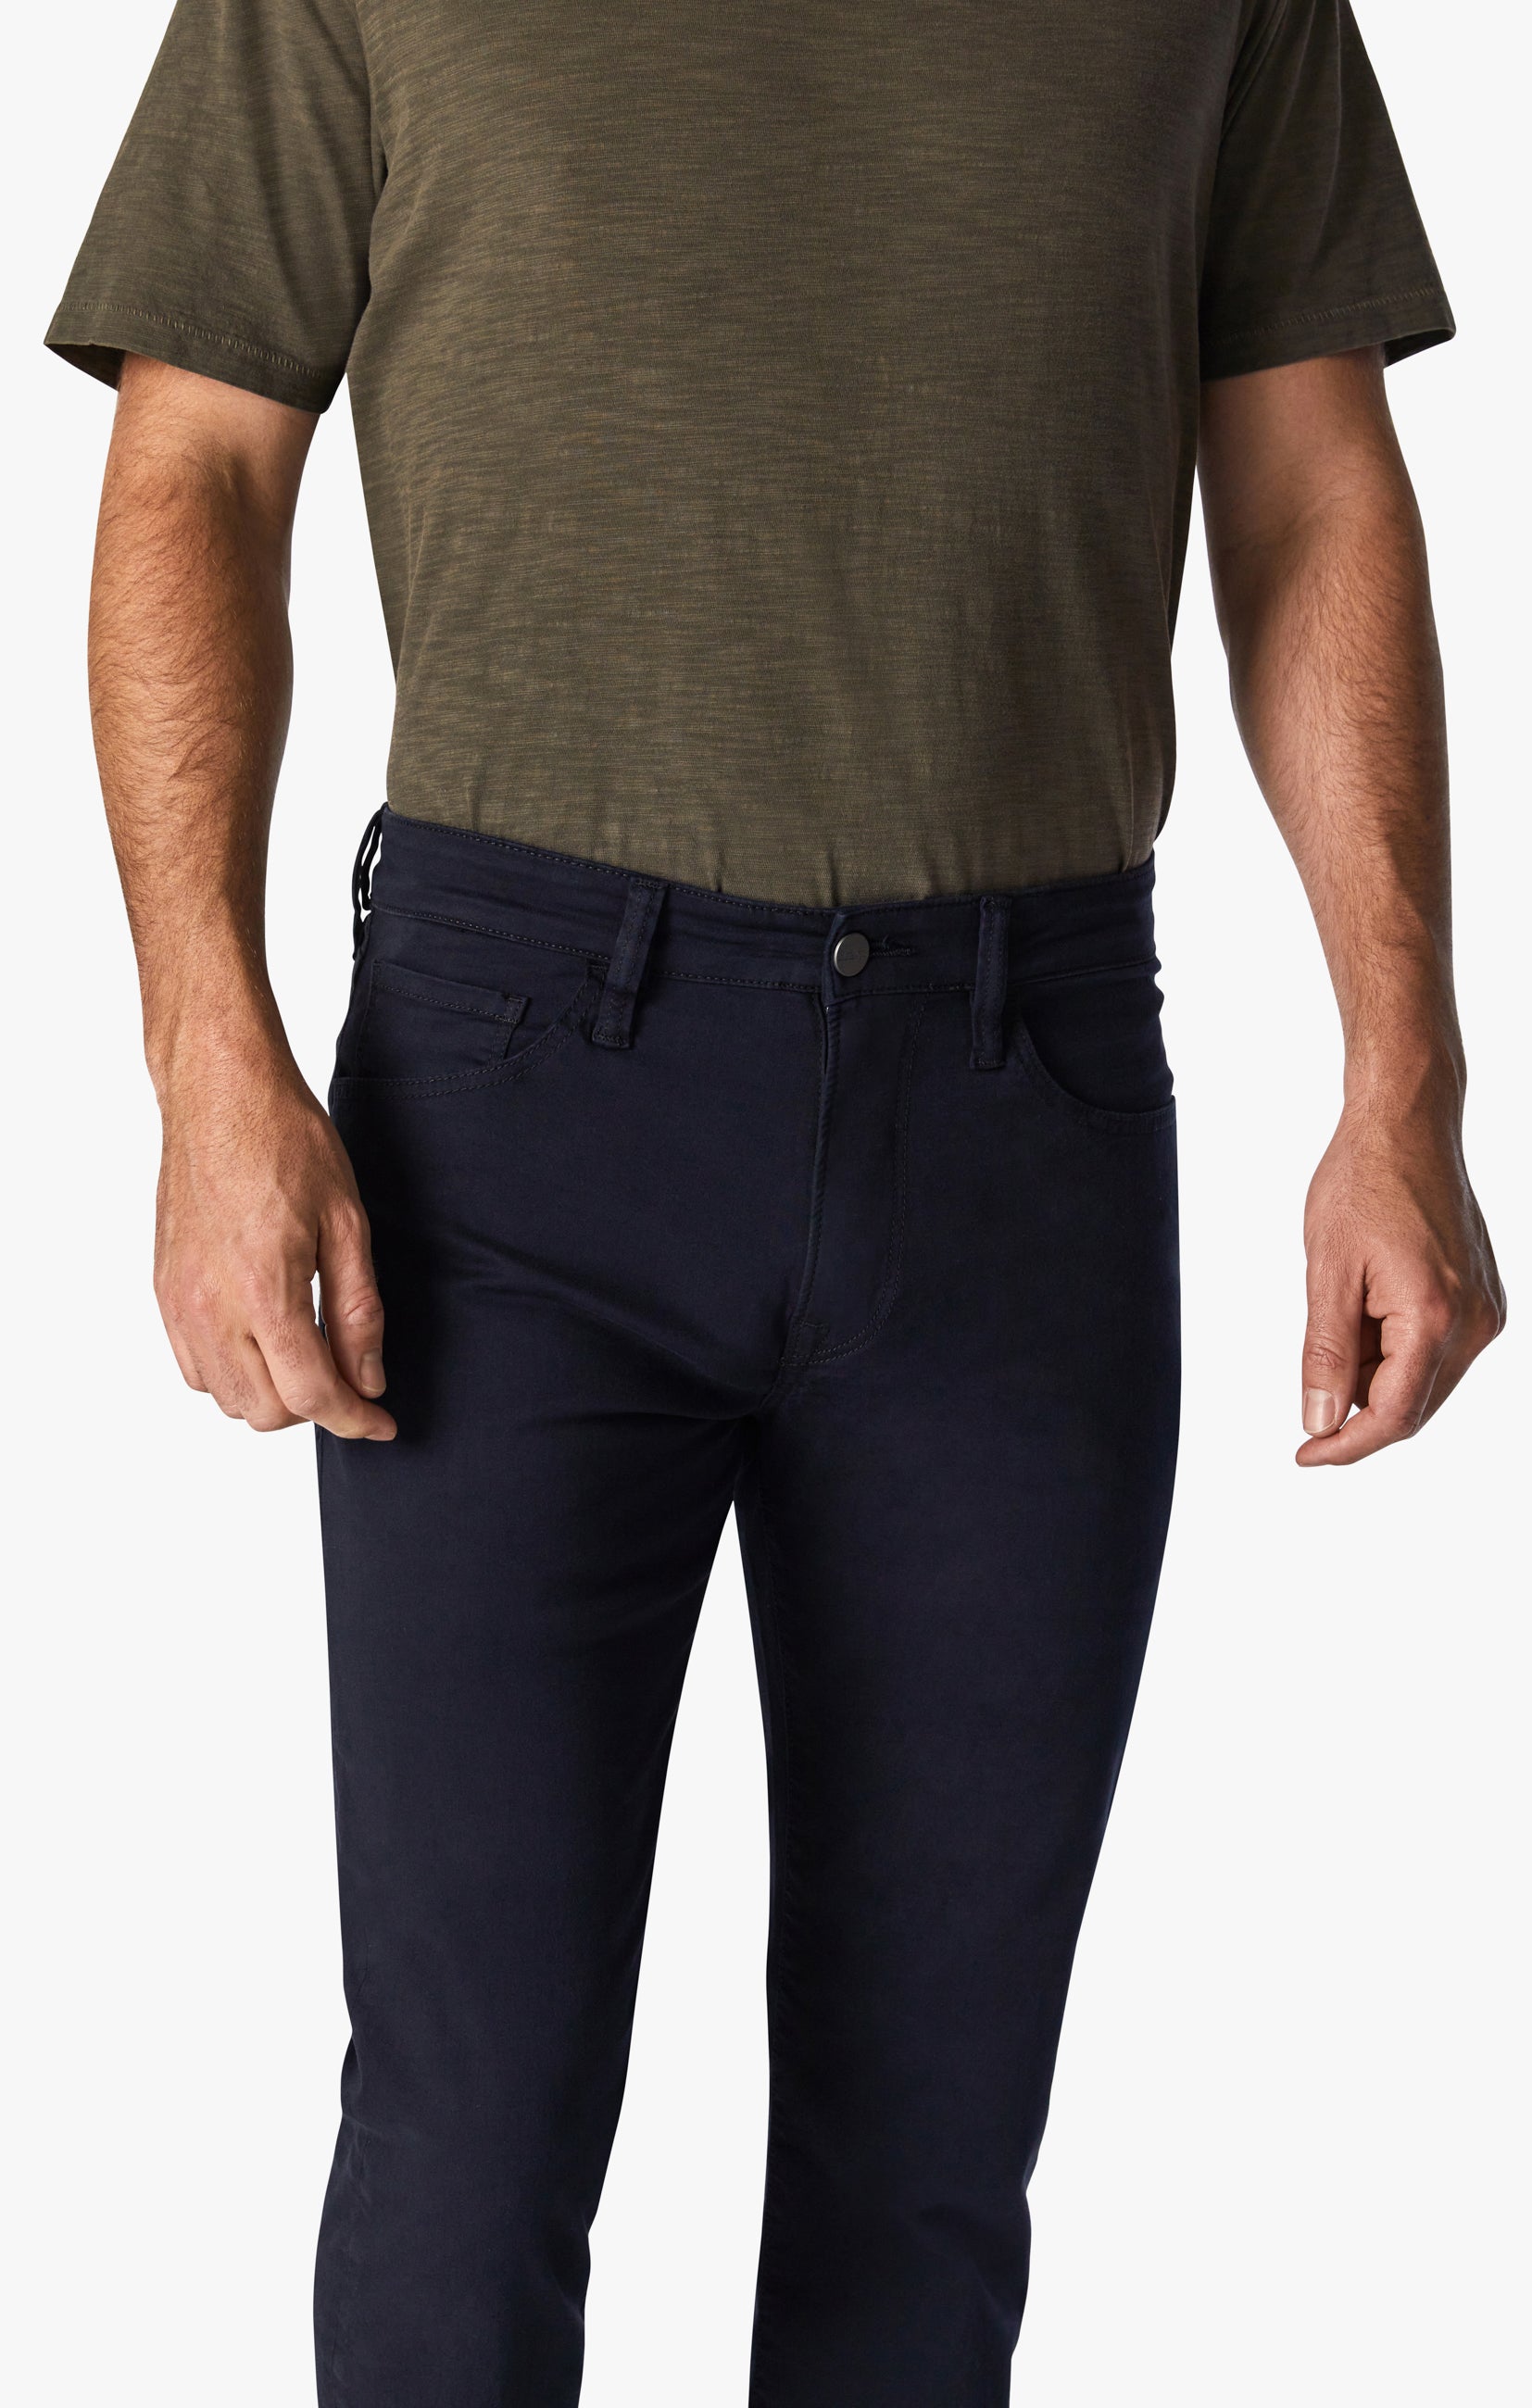 Courage Straight Leg Pants in Navy Twill Image 3